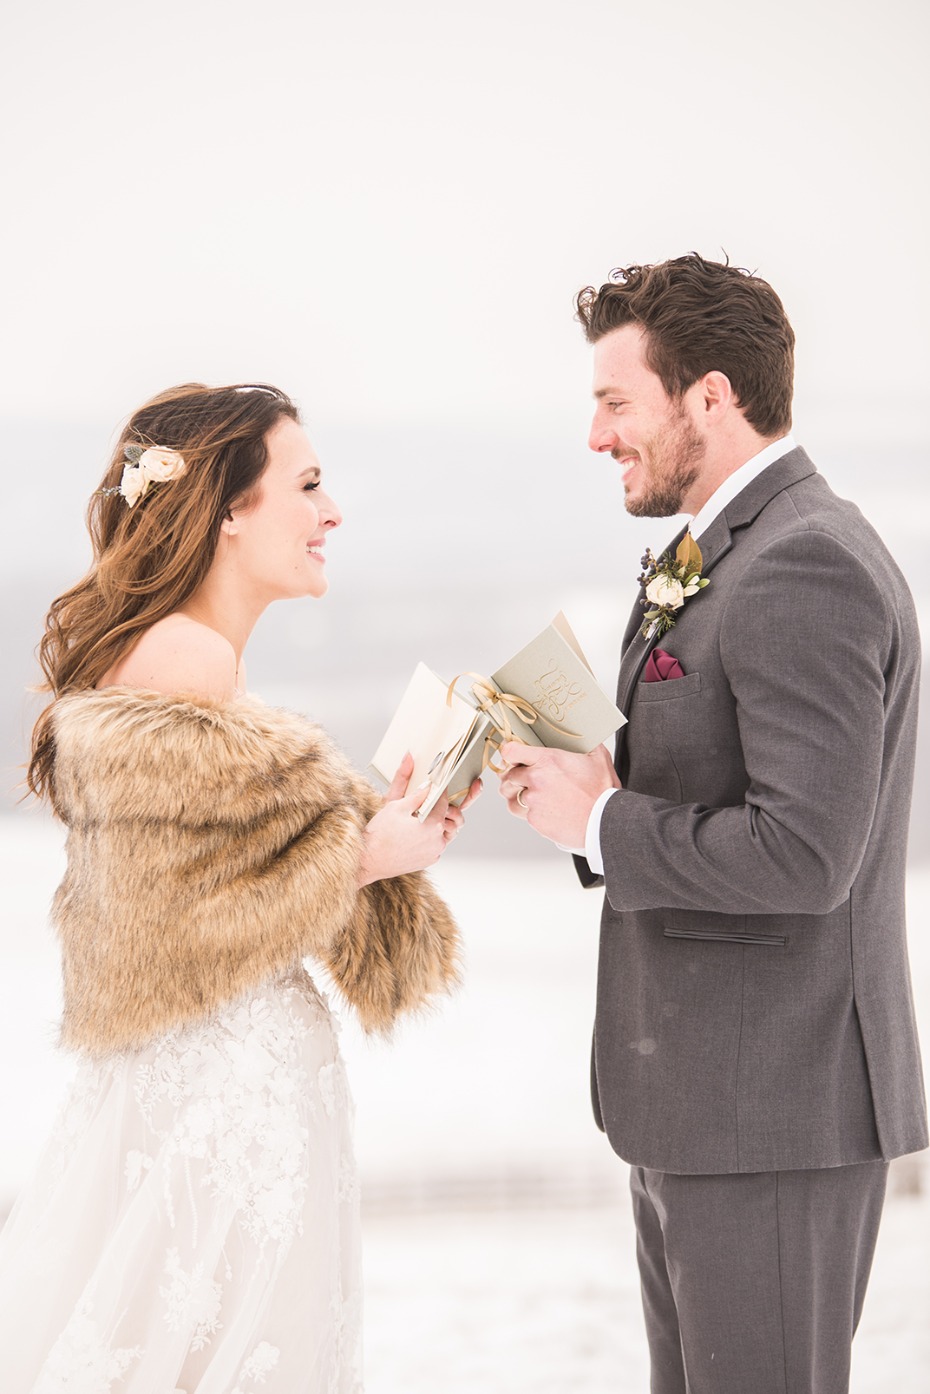 tying the knot in a winter wonderland